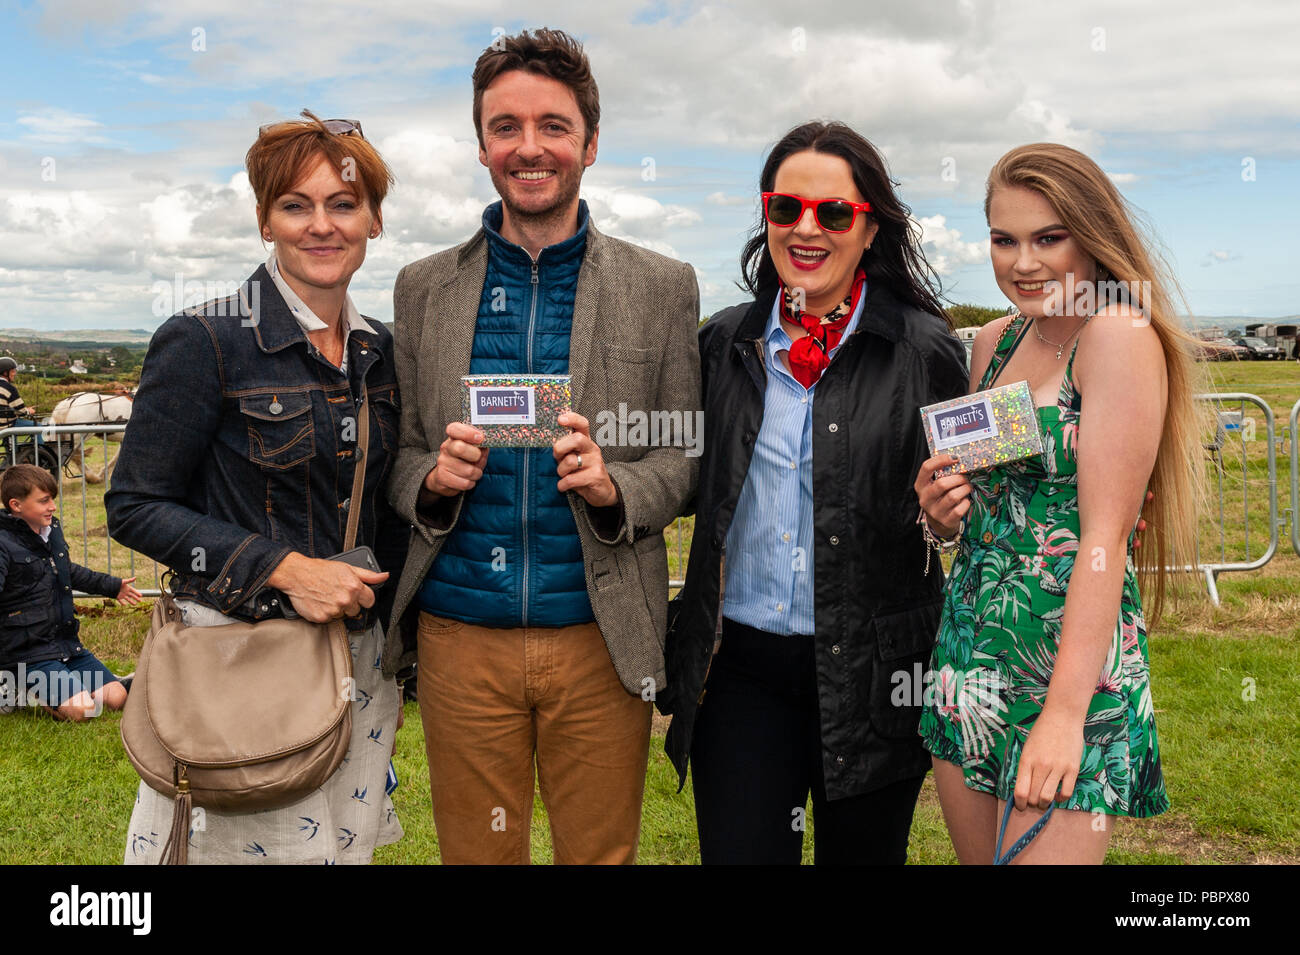 Schull, West Cork, Ireland. 29th July, 2018. Schull Agricultural Show is underway in blazing sunshine with hundreds of people attending. Beauty & Fashion Journalist and TV Presenter Triona McCarthy judged the Best Dressed Lady and Gentleman at the show. The winners, John Heffernan from Ardfield and Annie O'Brien from Kilvrounge, are pictured with competition sponsor Miriam Pyburn and judge Triona McCarthy. Credit: Andy Gibson/Alamy Live News. Stock Photo